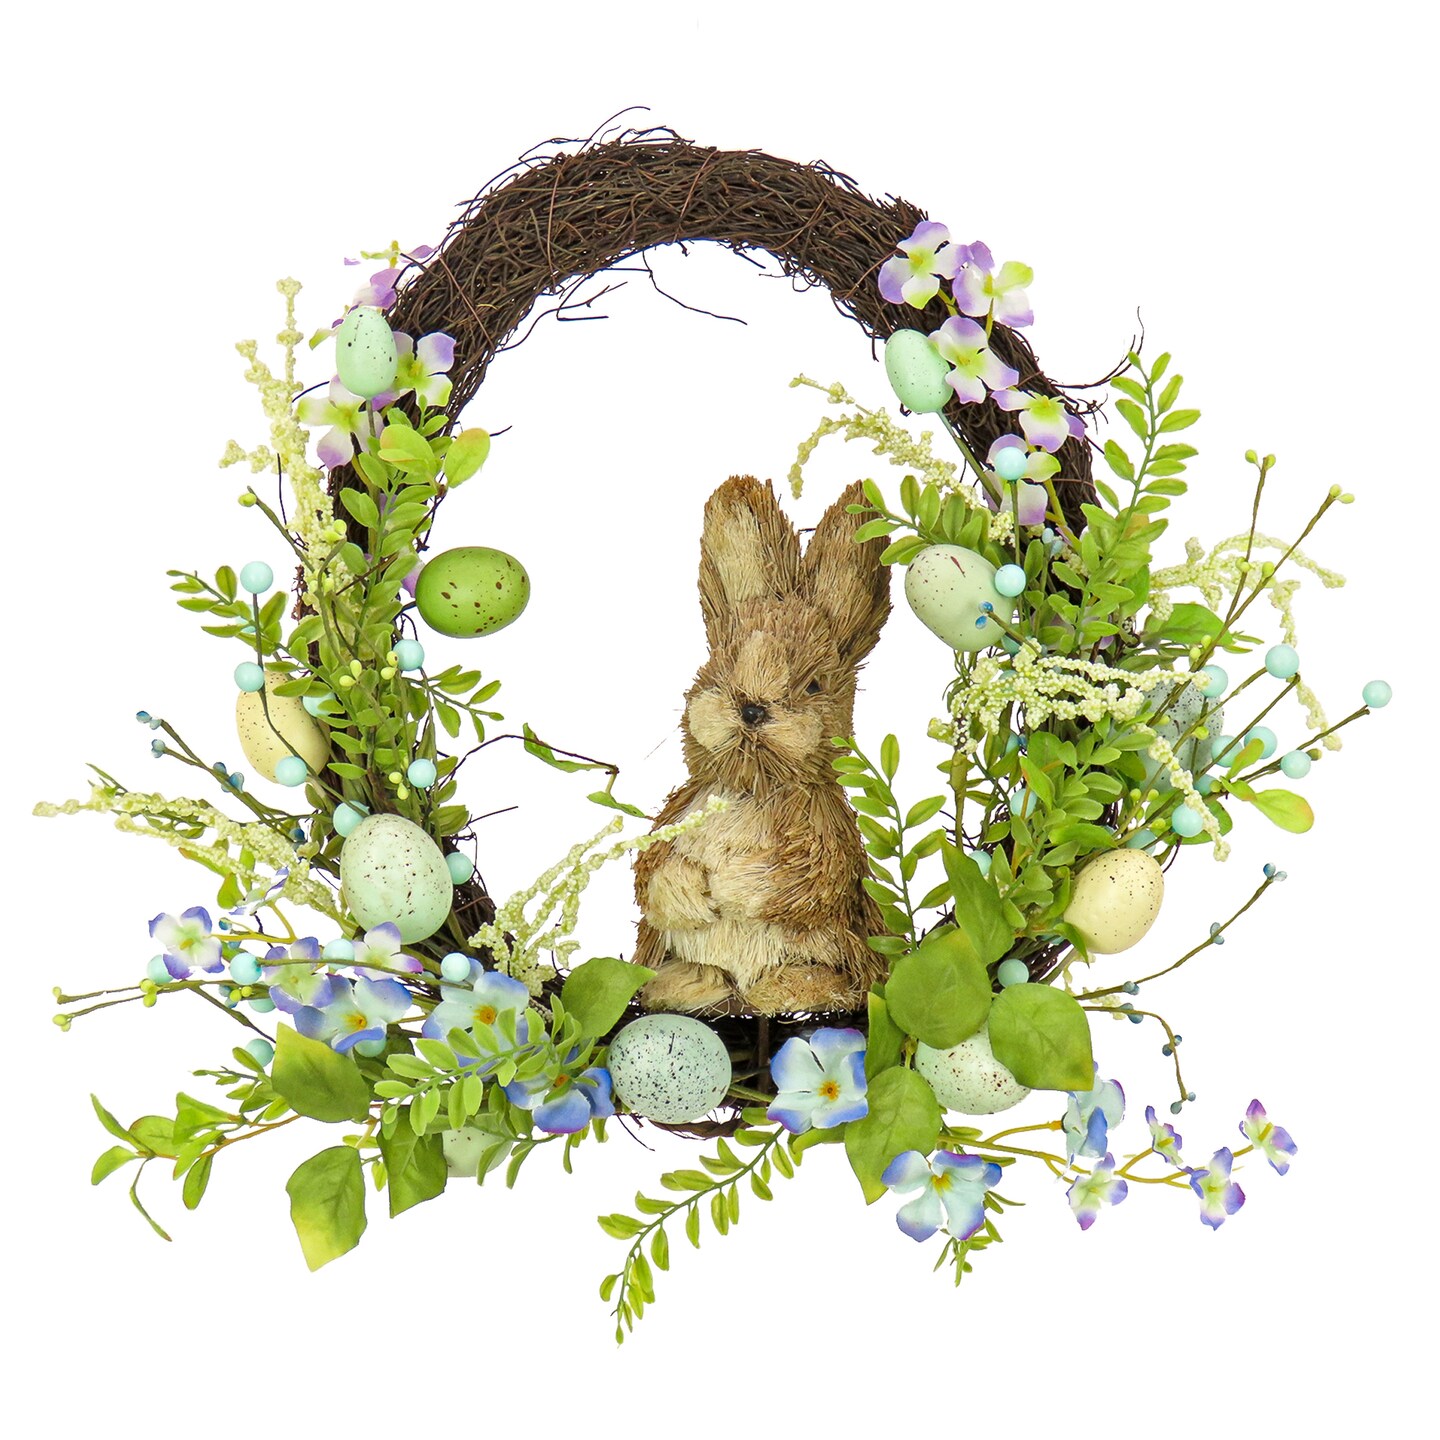 National Tree Company Artificial Spring Wreath, Woven Branch Base, Decorated with Wooden Bunny, Blue Flower Blooms, Pastel Eggs, Berries, Easter Collection, 16 Inches